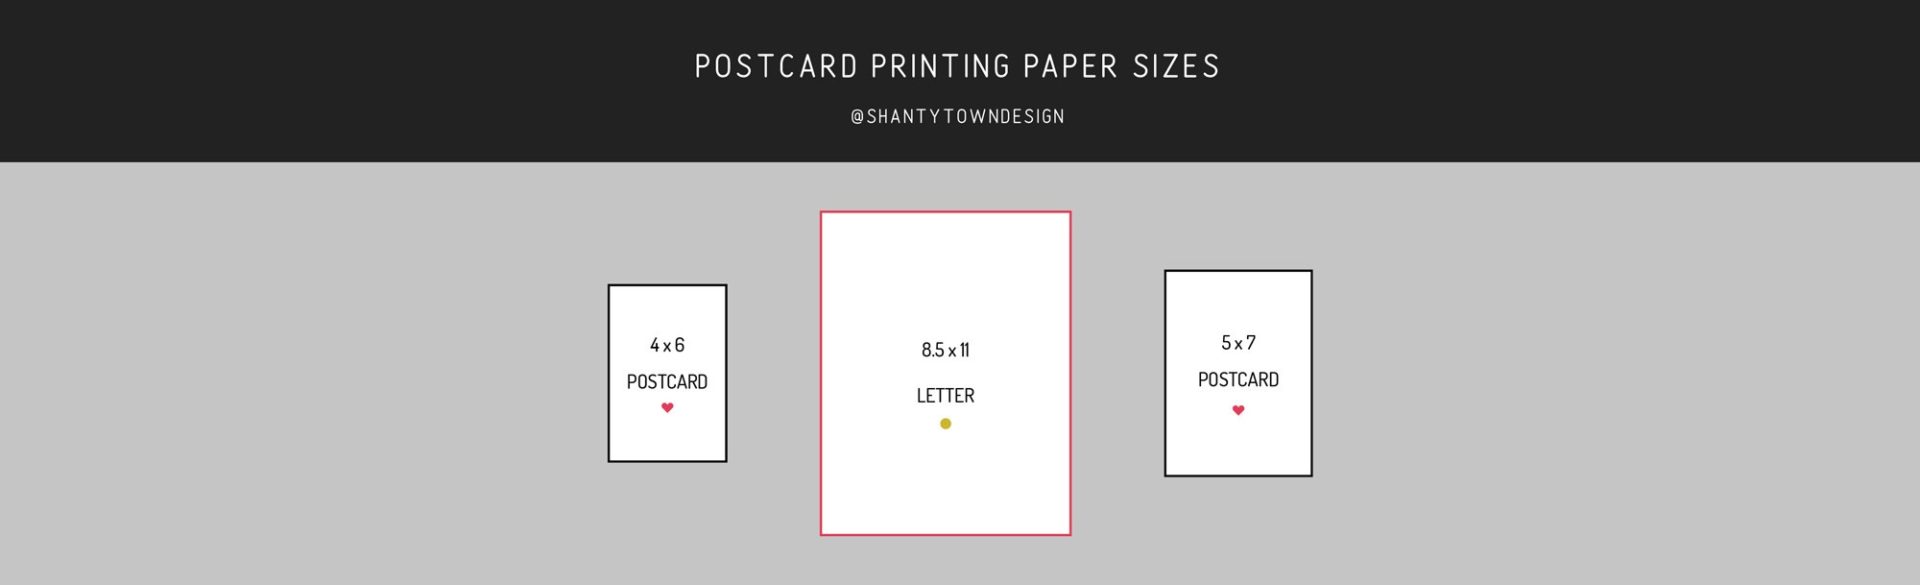 US postcard paper printing size guide